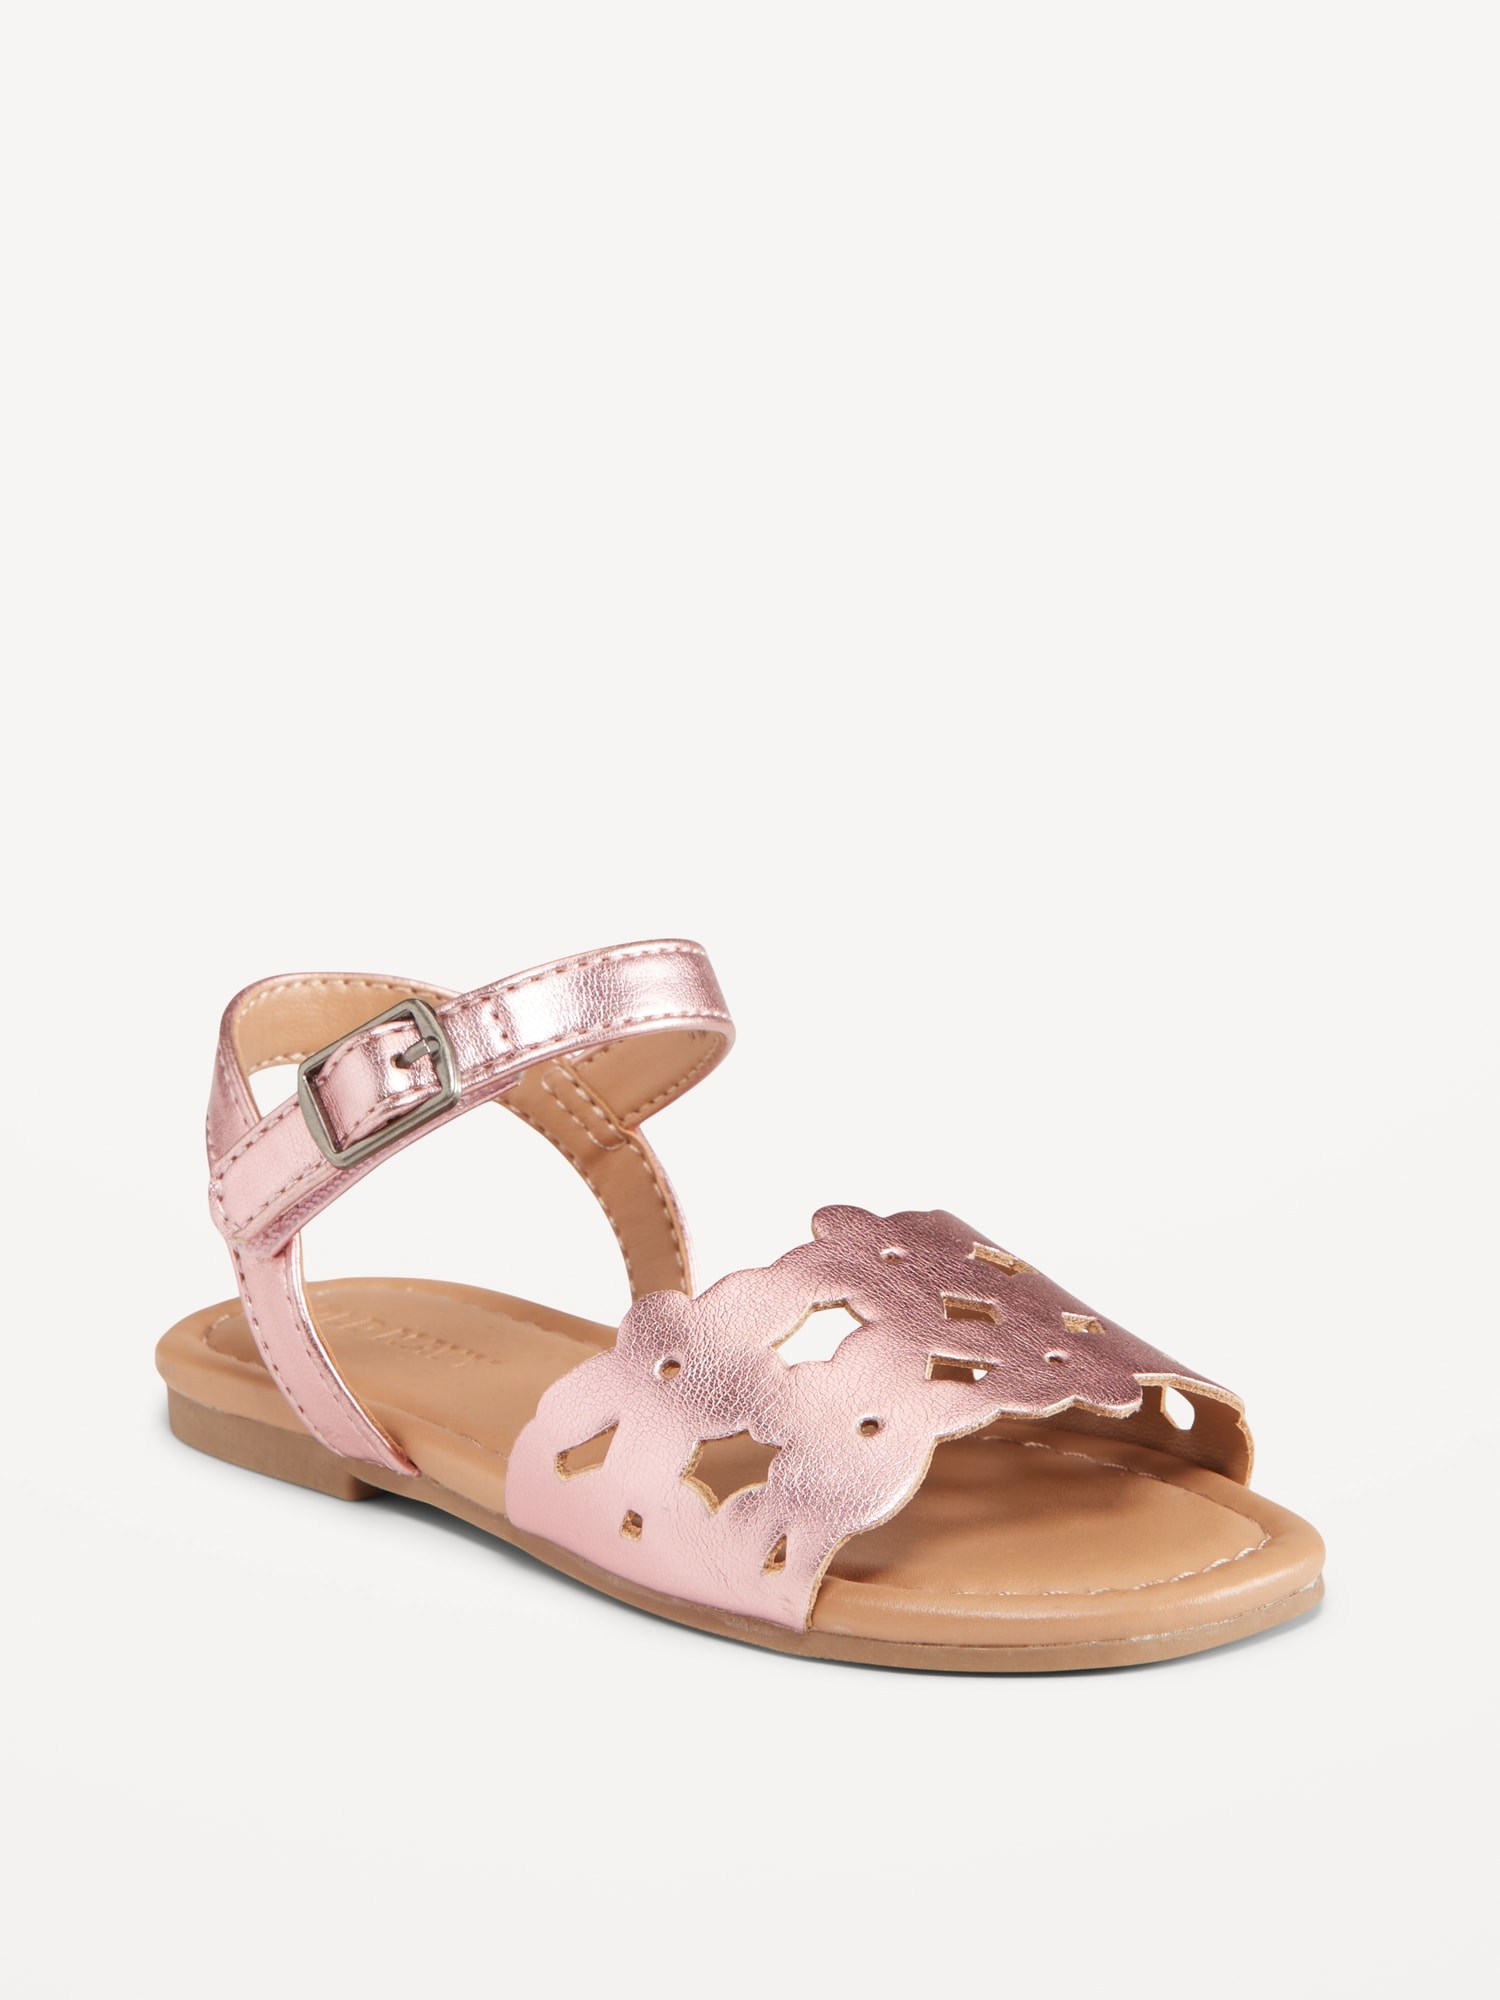 Faux-Leather Cutout Sandals for Toddler Girls